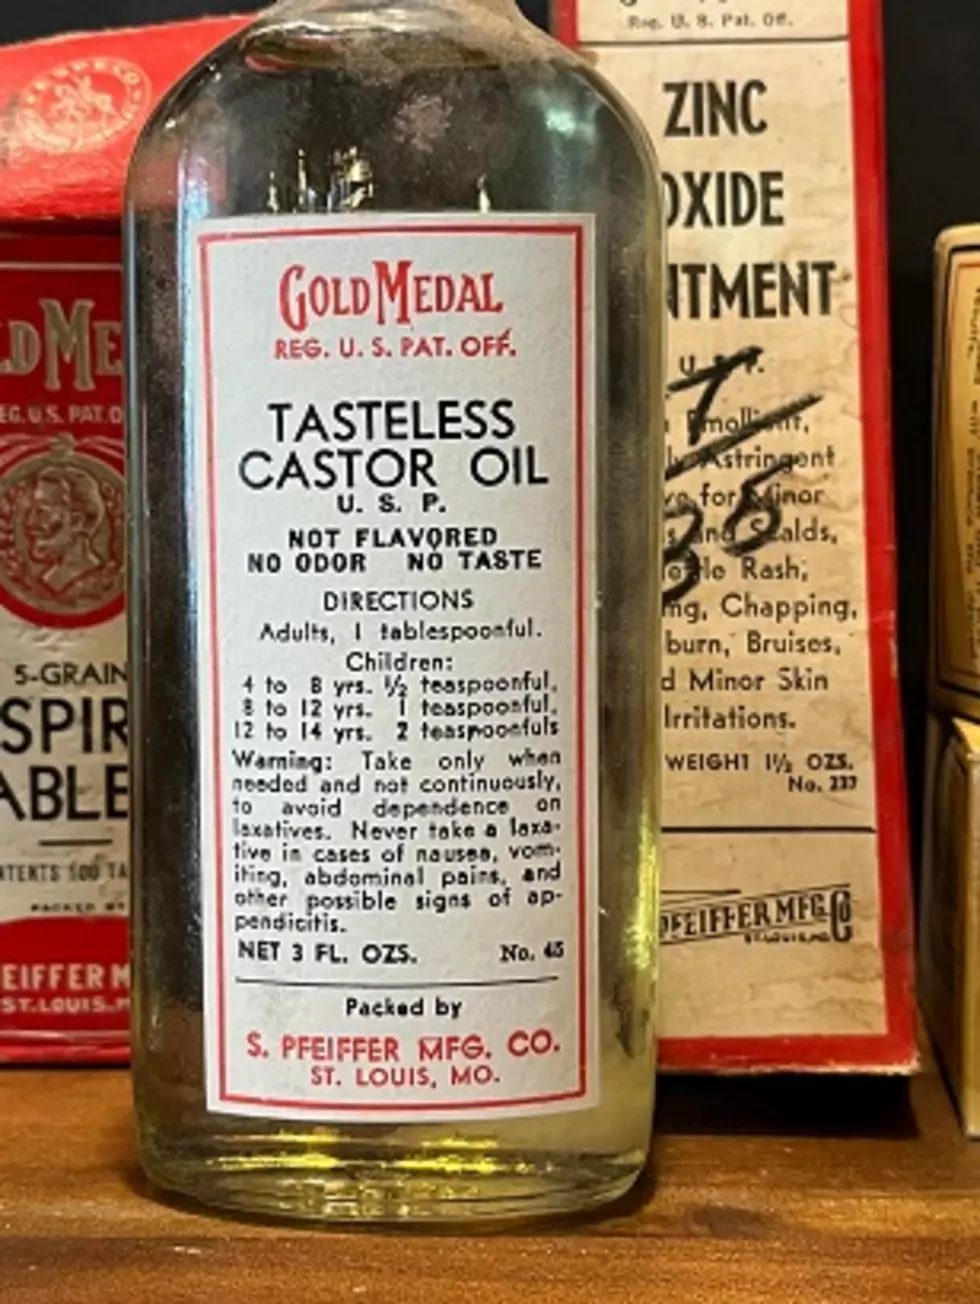 SEE: Weird Medicines From An Old Wyoming Pharmacy